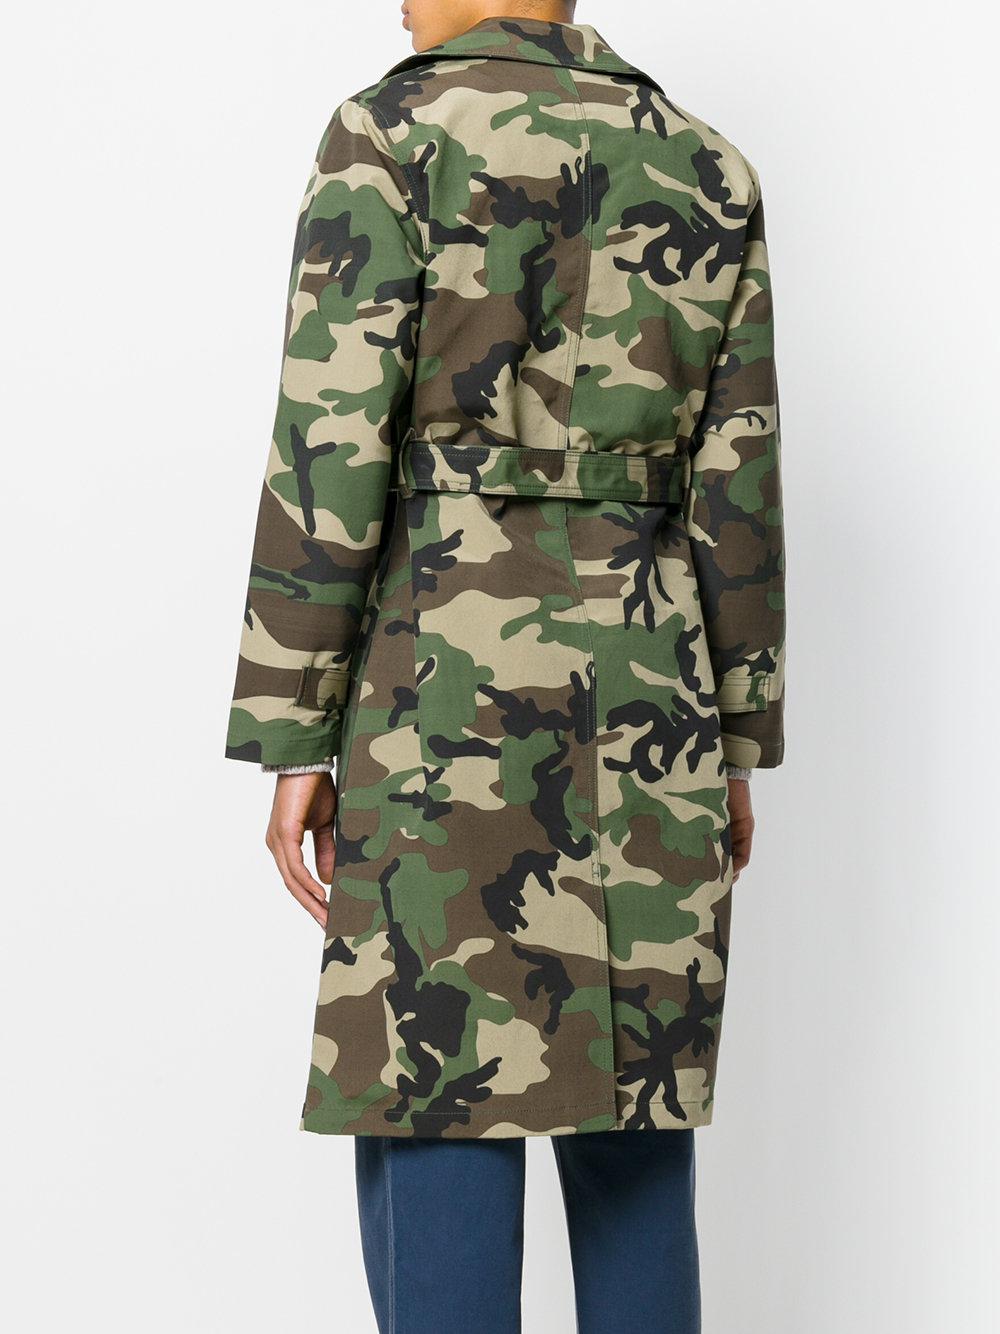 Stussy Cotton Camouflage Trench Coat in Green for Men - Lyst